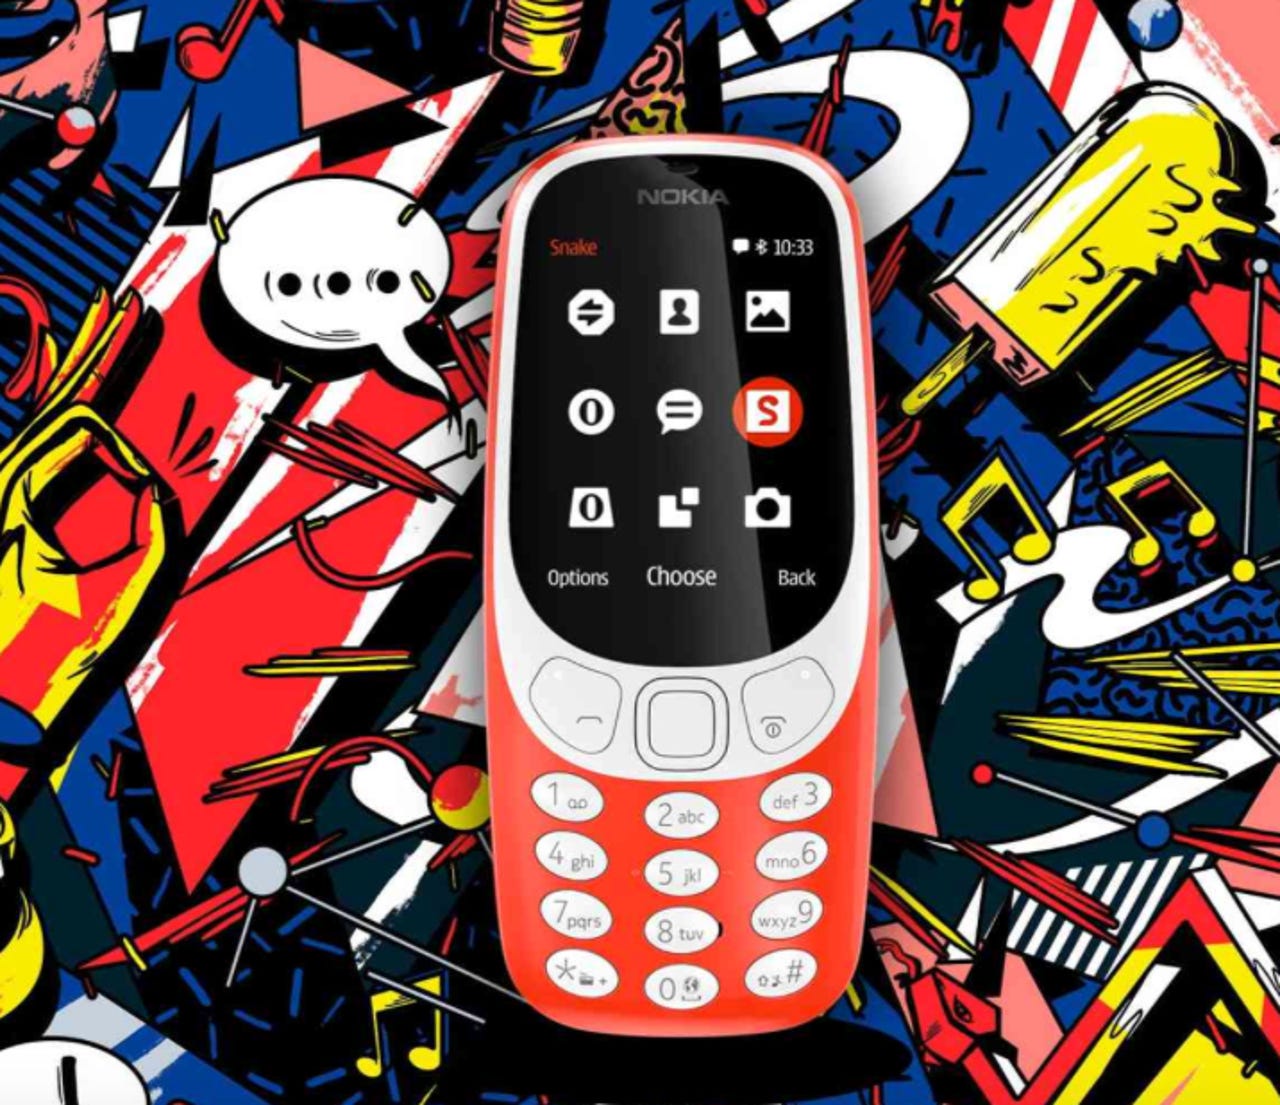 The Nokia 3310 is coming back: Here's how to play Snake right now